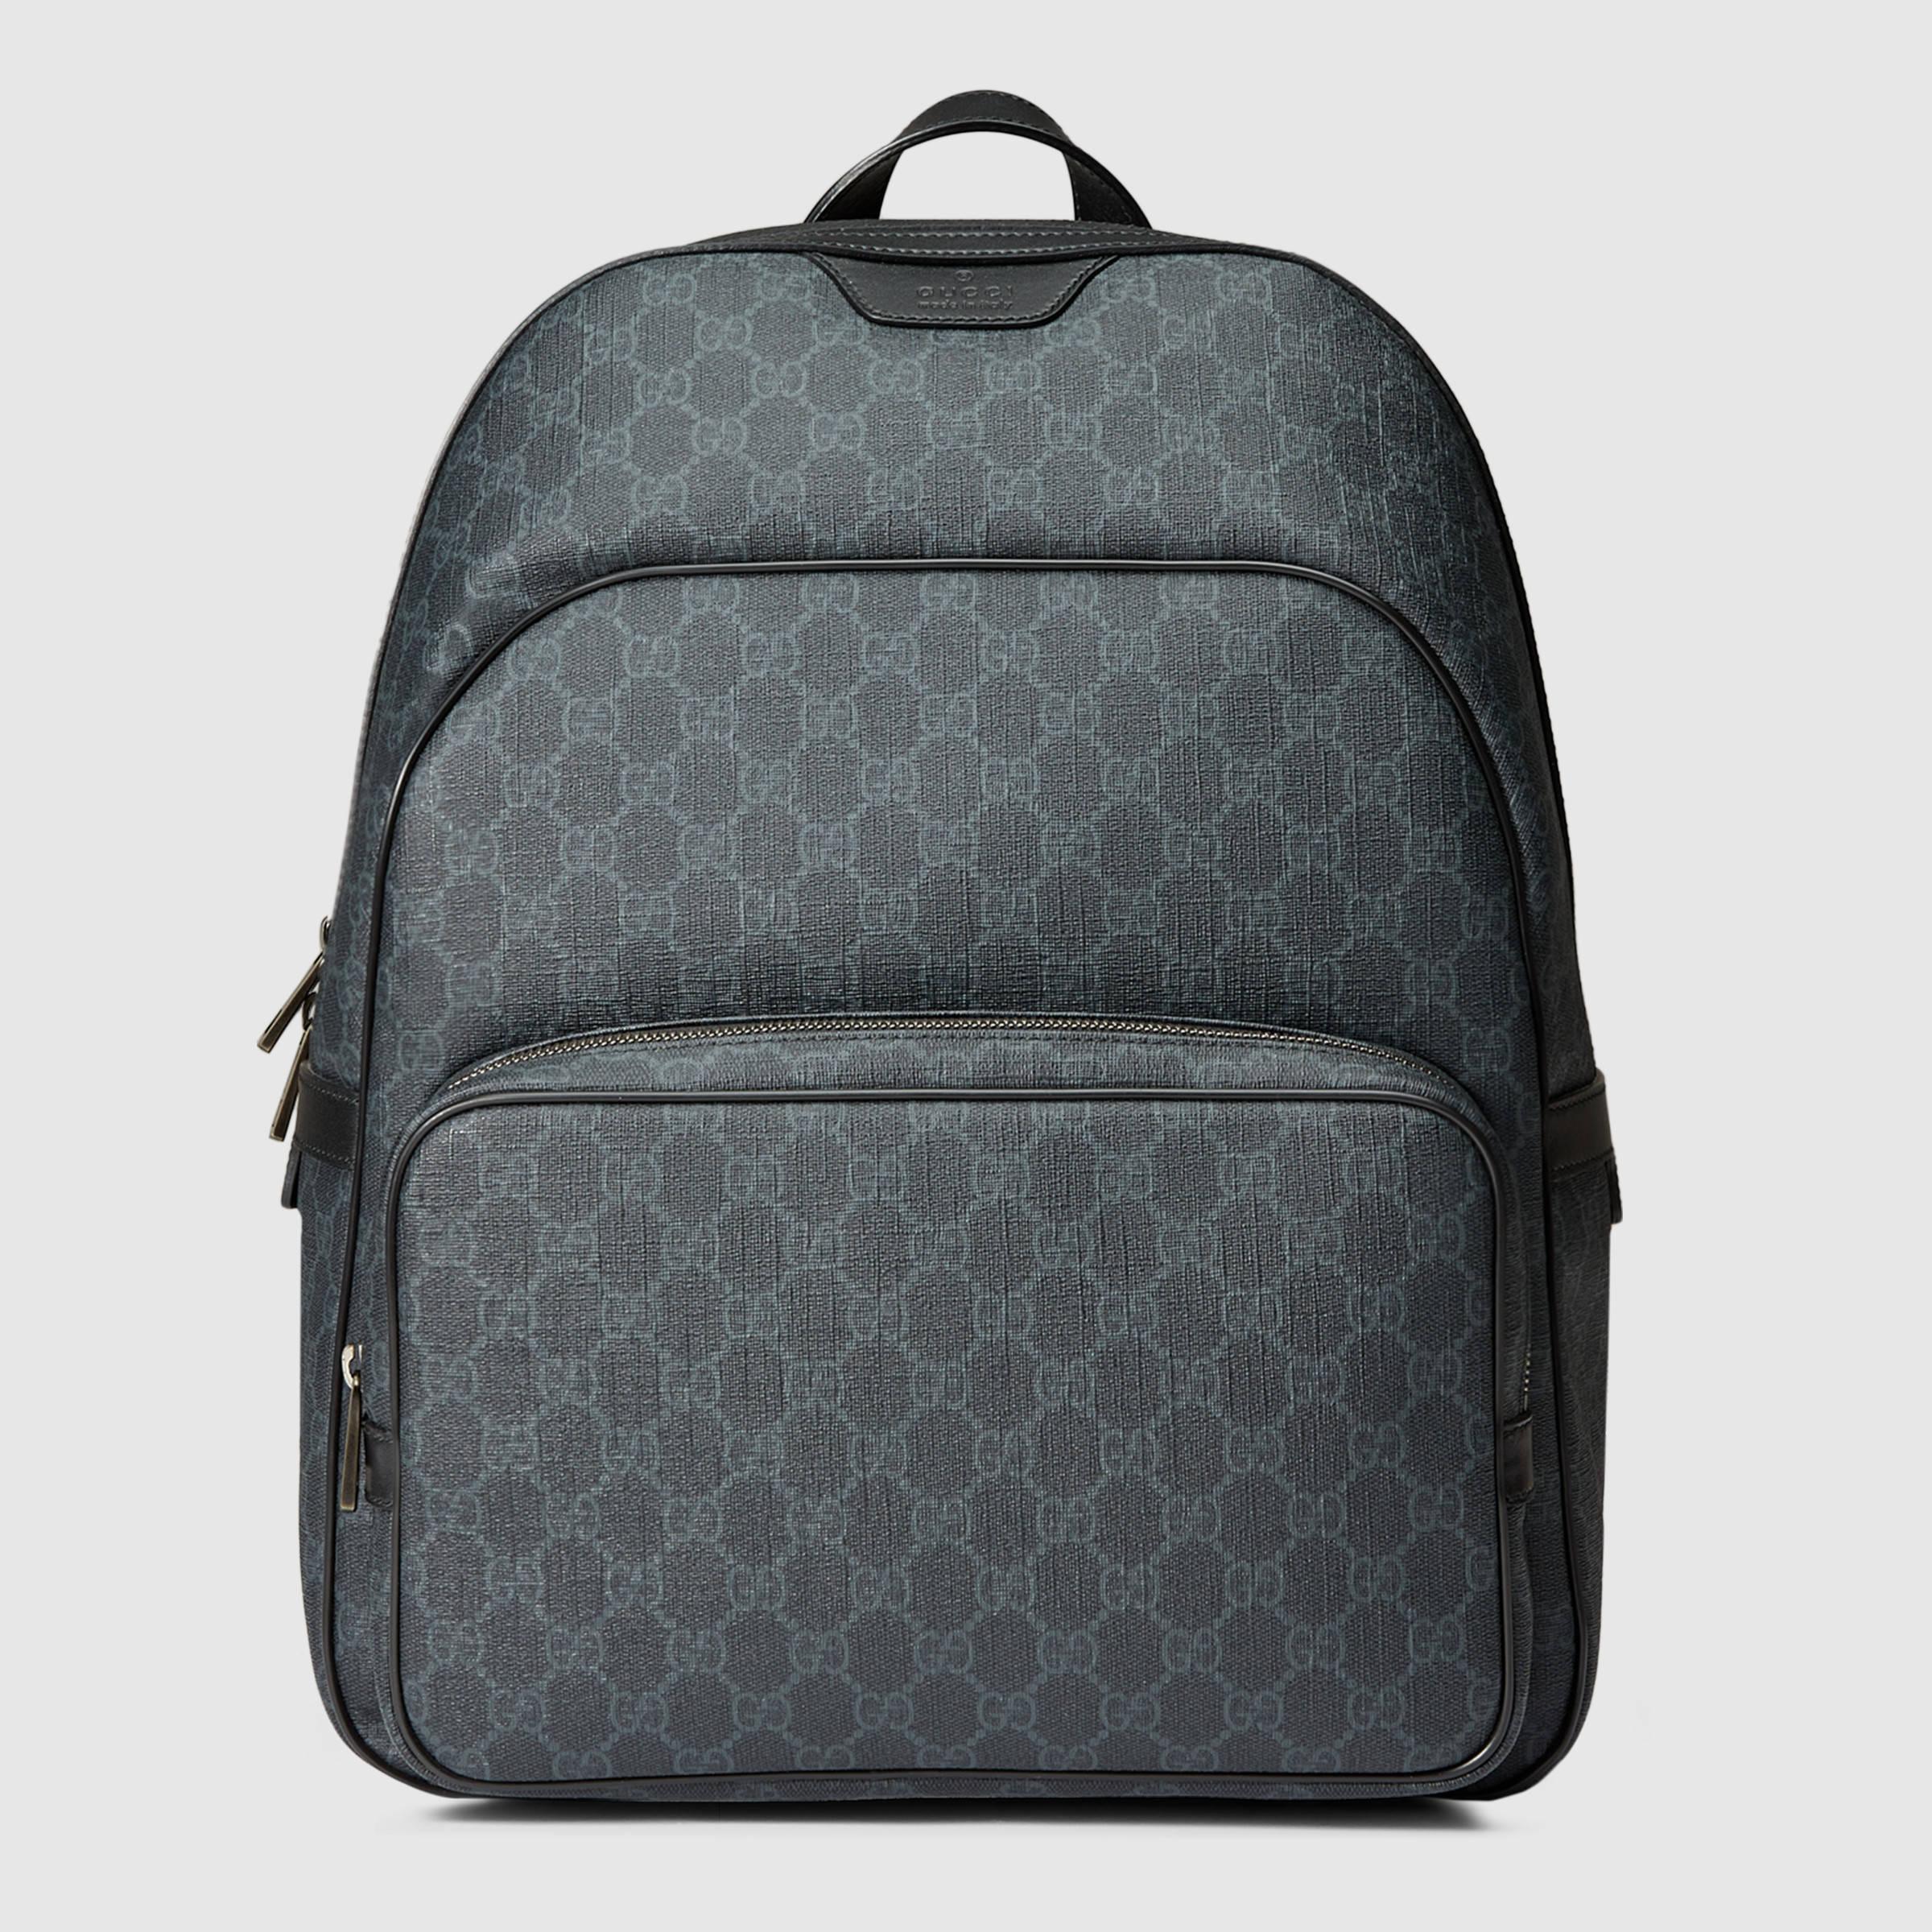 Gucci Gg Supreme Canvas Backpack in Black for Men - Lyst